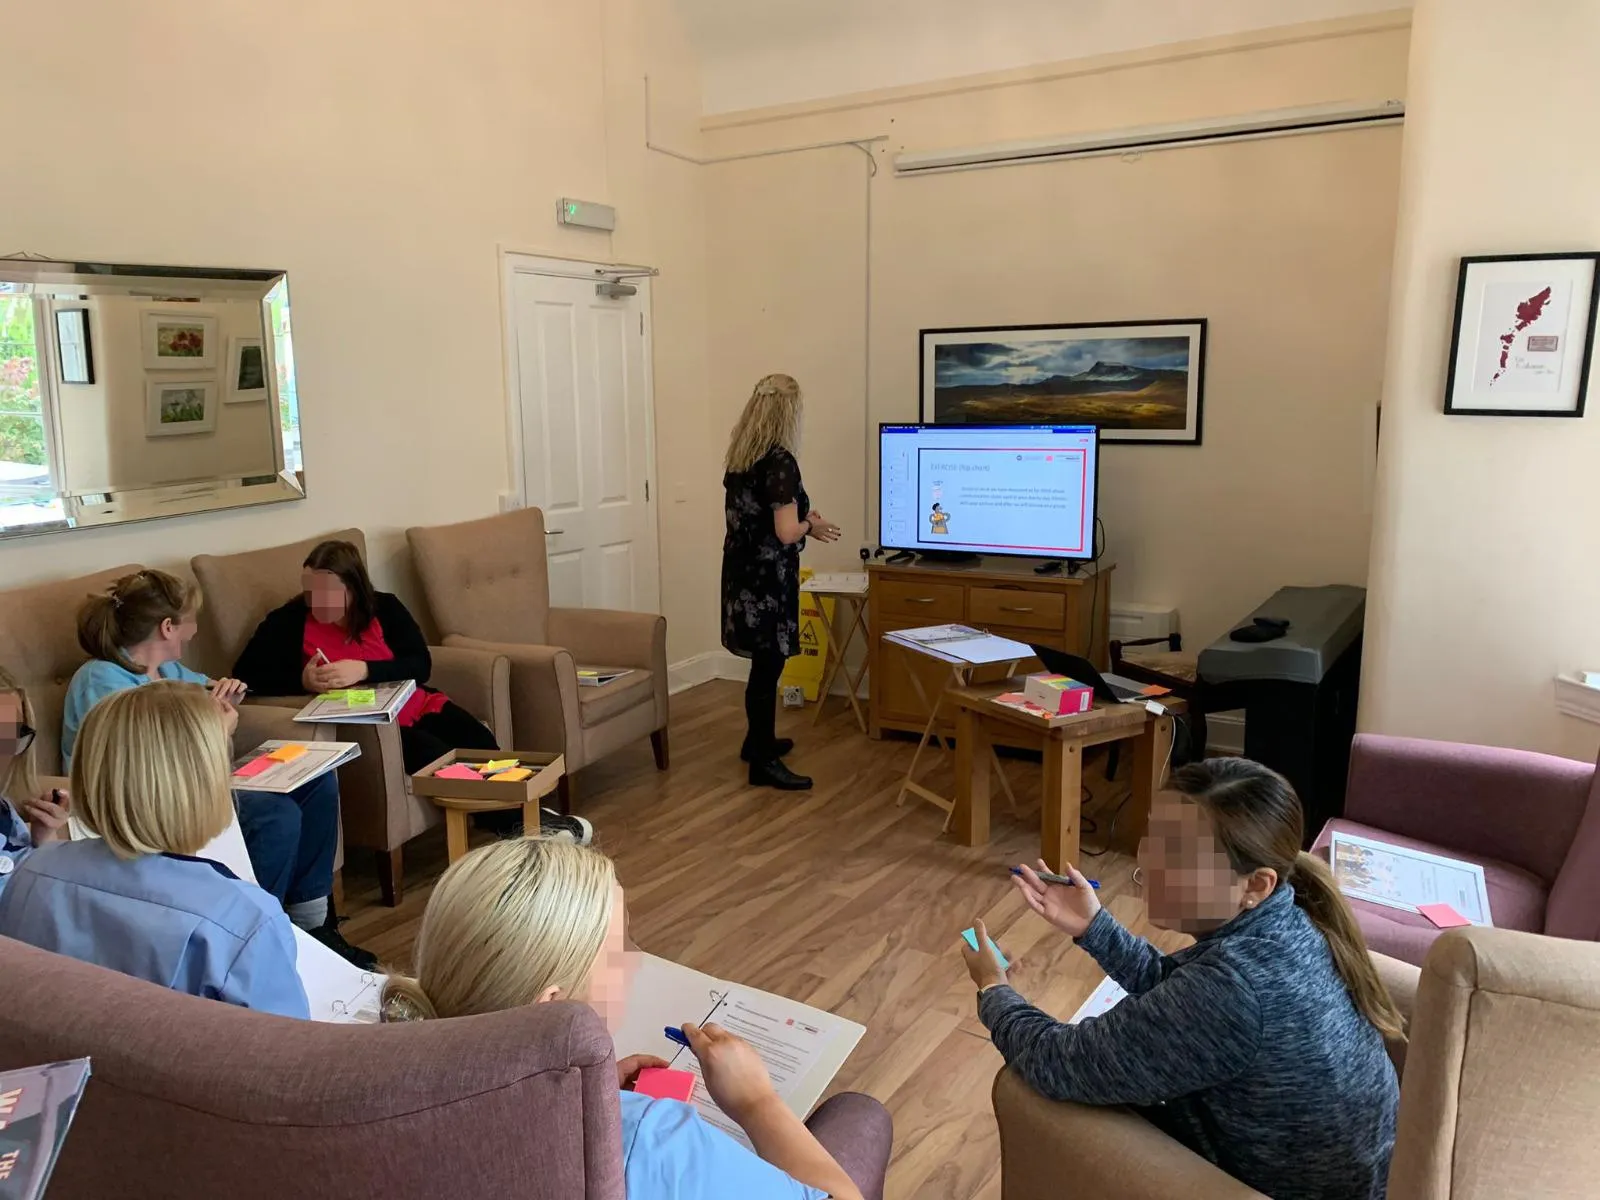 Effective and Relational Communication training at a Care home